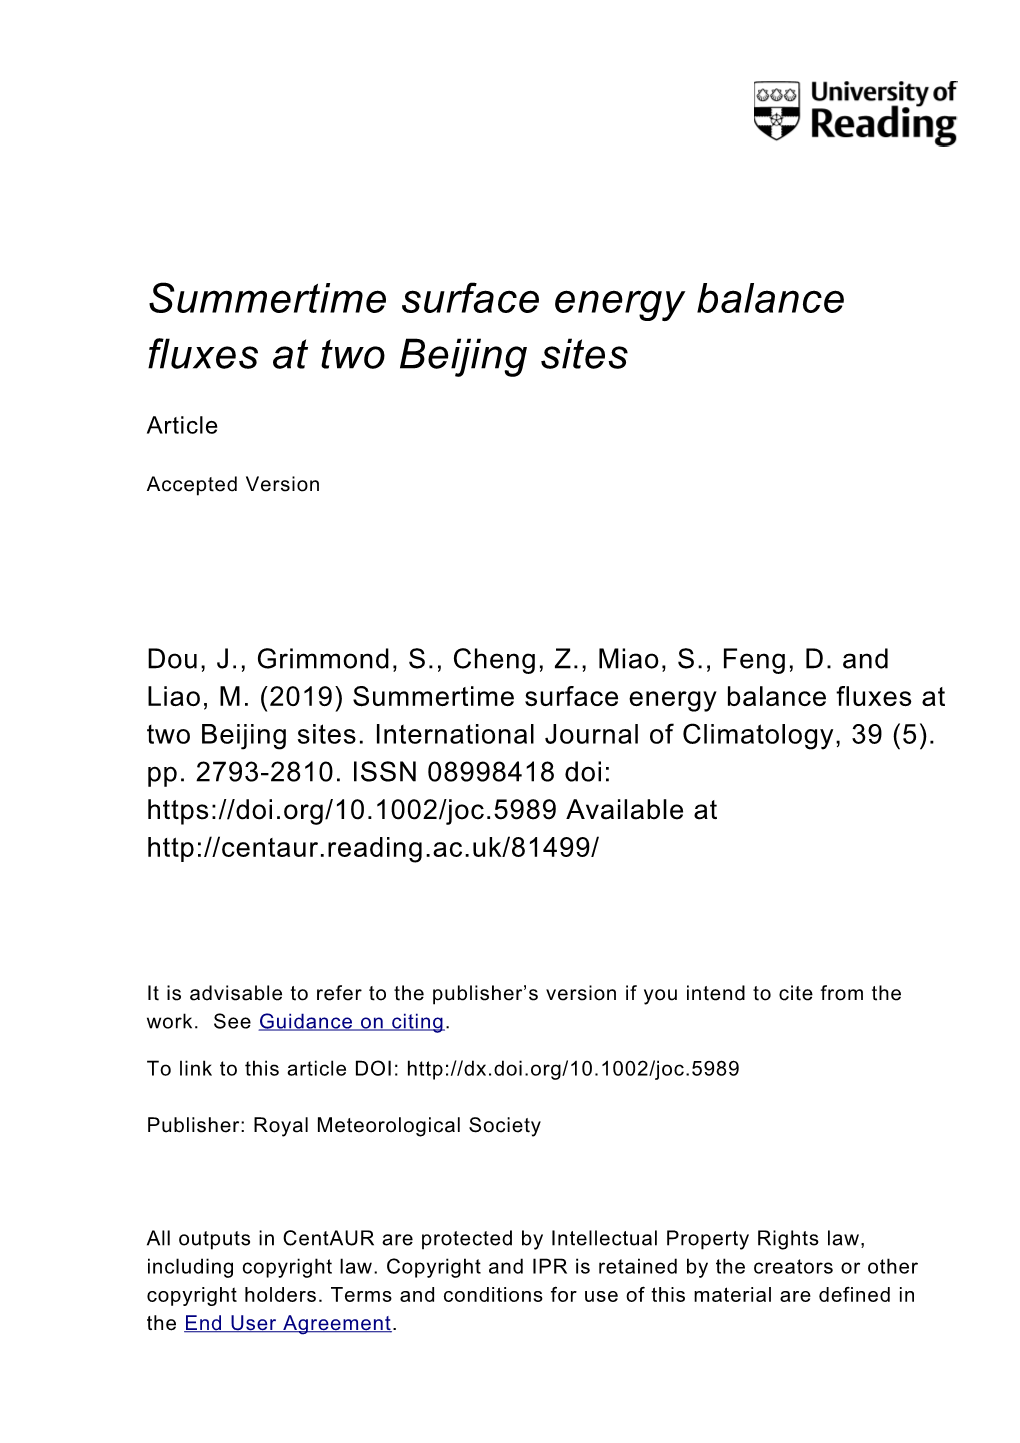 Summertime Surface Energy Balance Fluxes at Two Beijing Sites